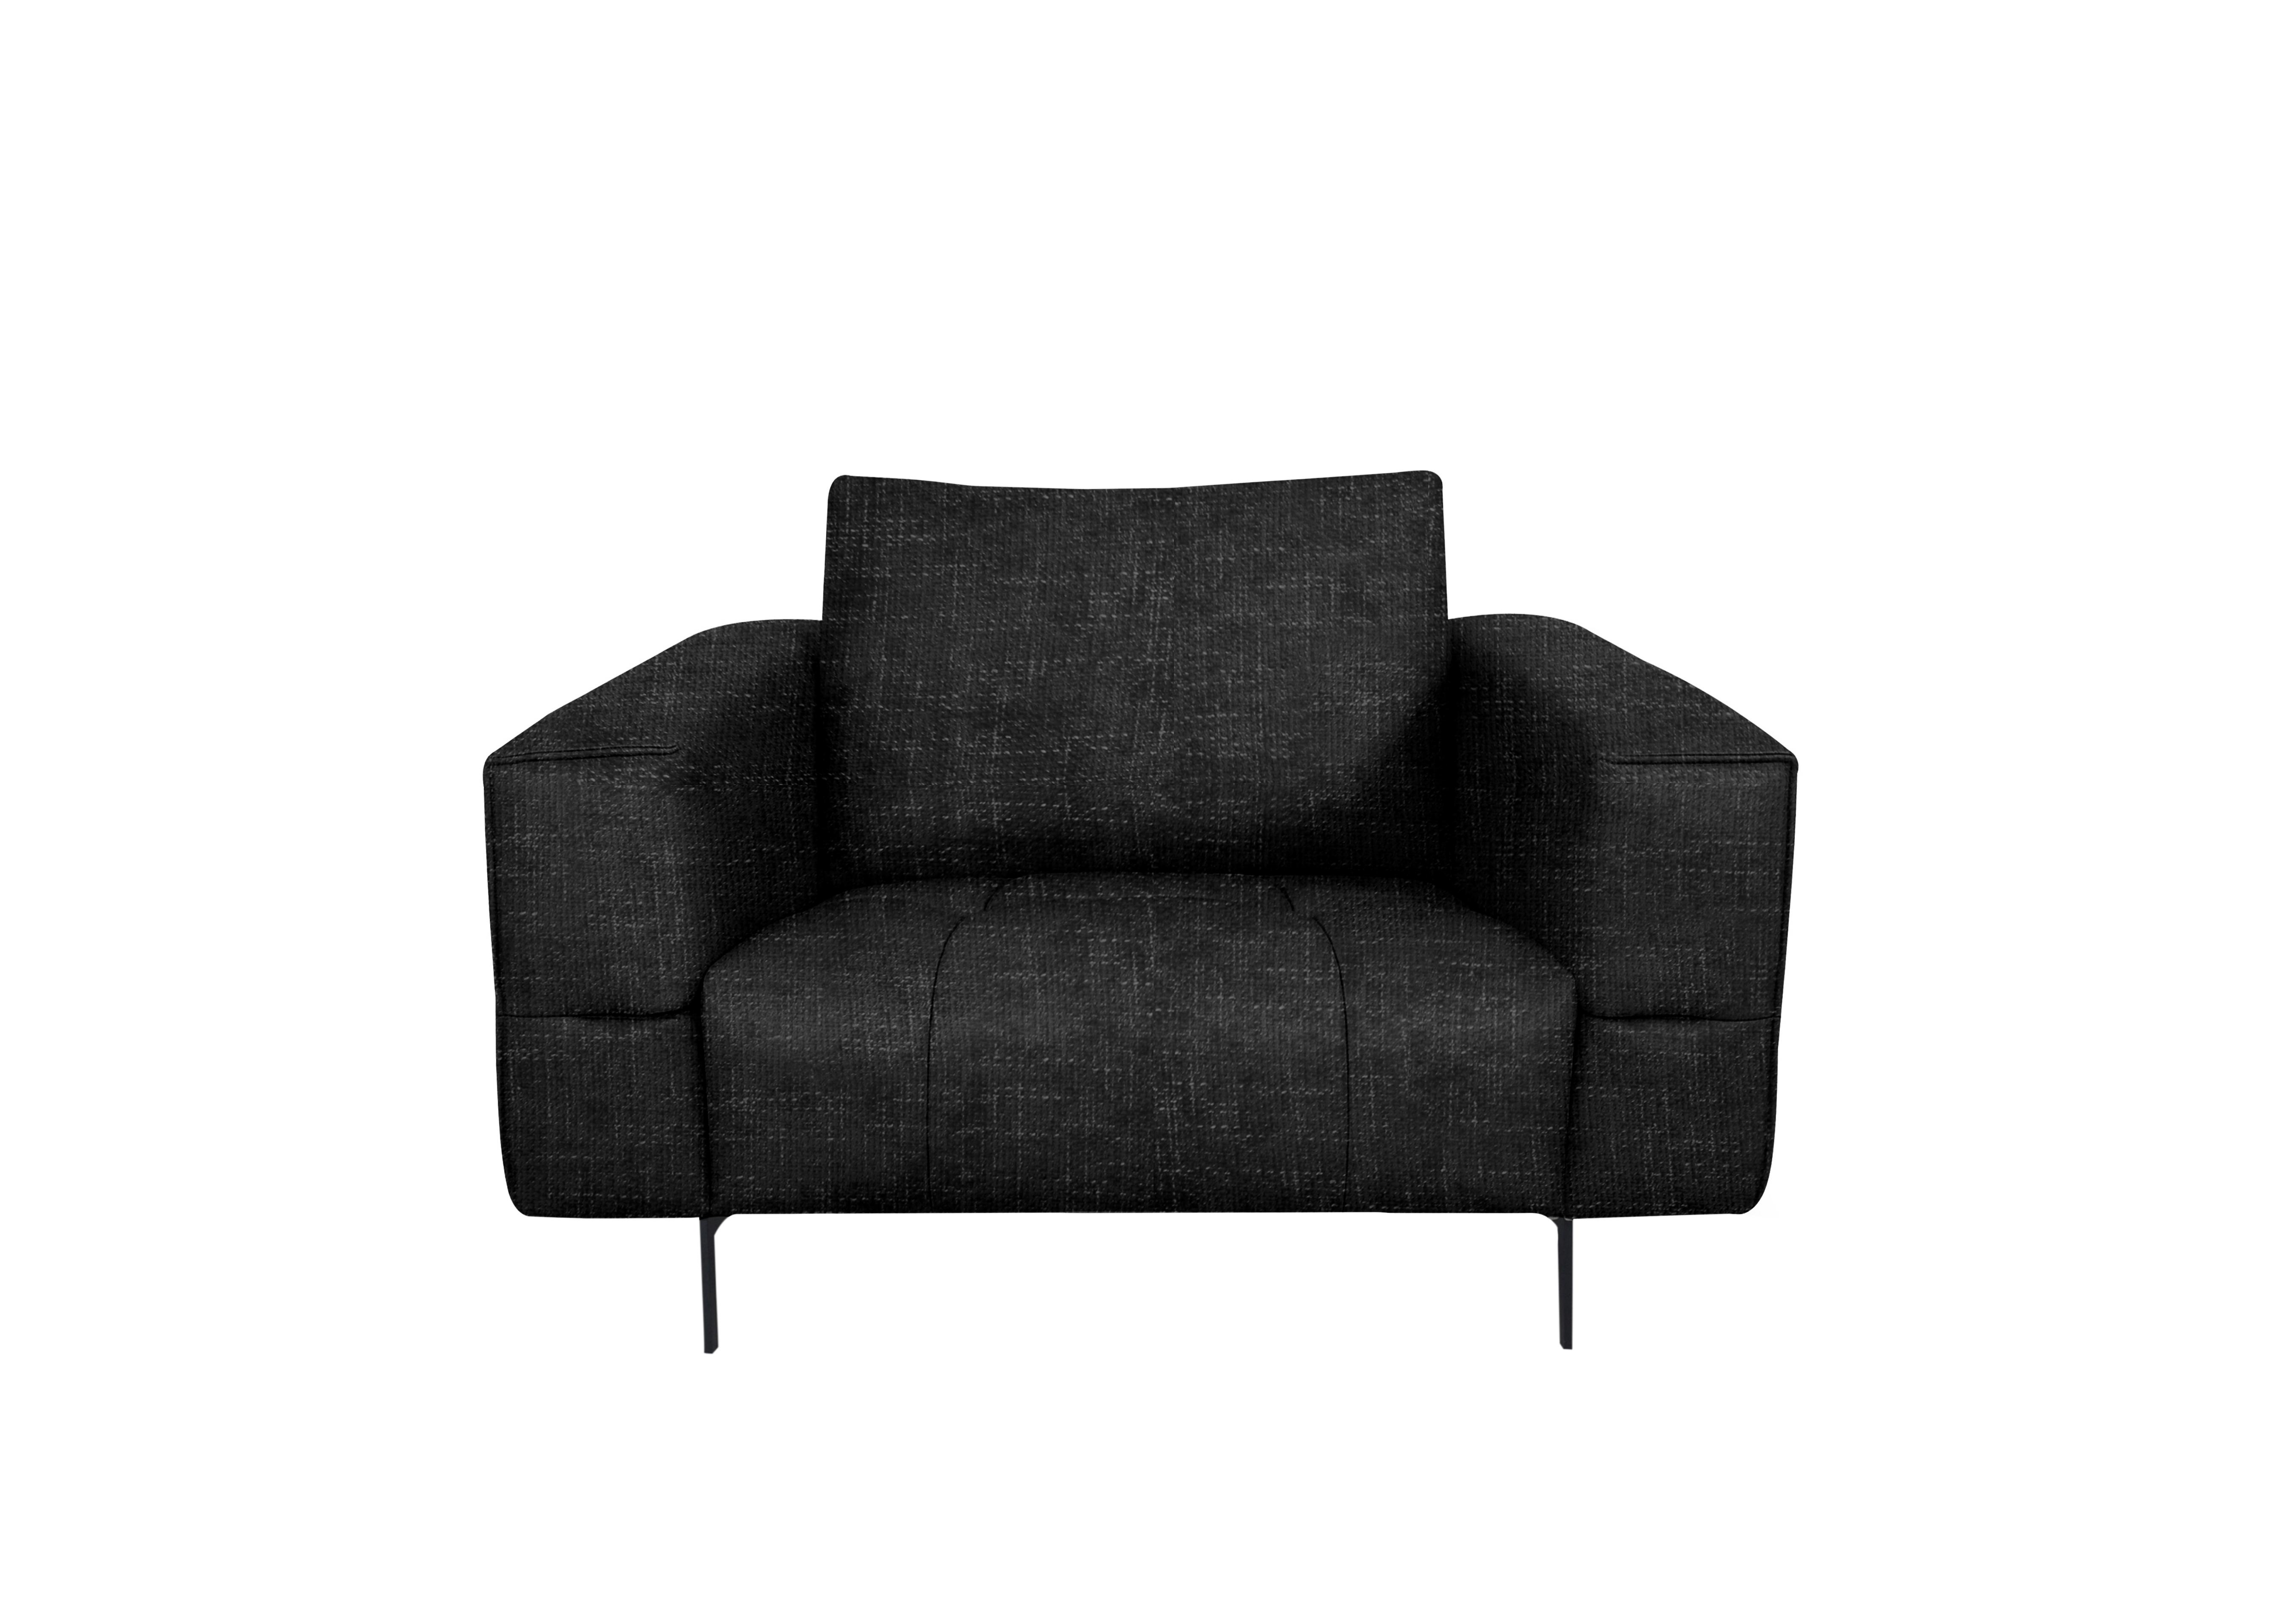 Lawson Fabric Armchair in Fab-Cac-R463 Black Mica on Furniture Village